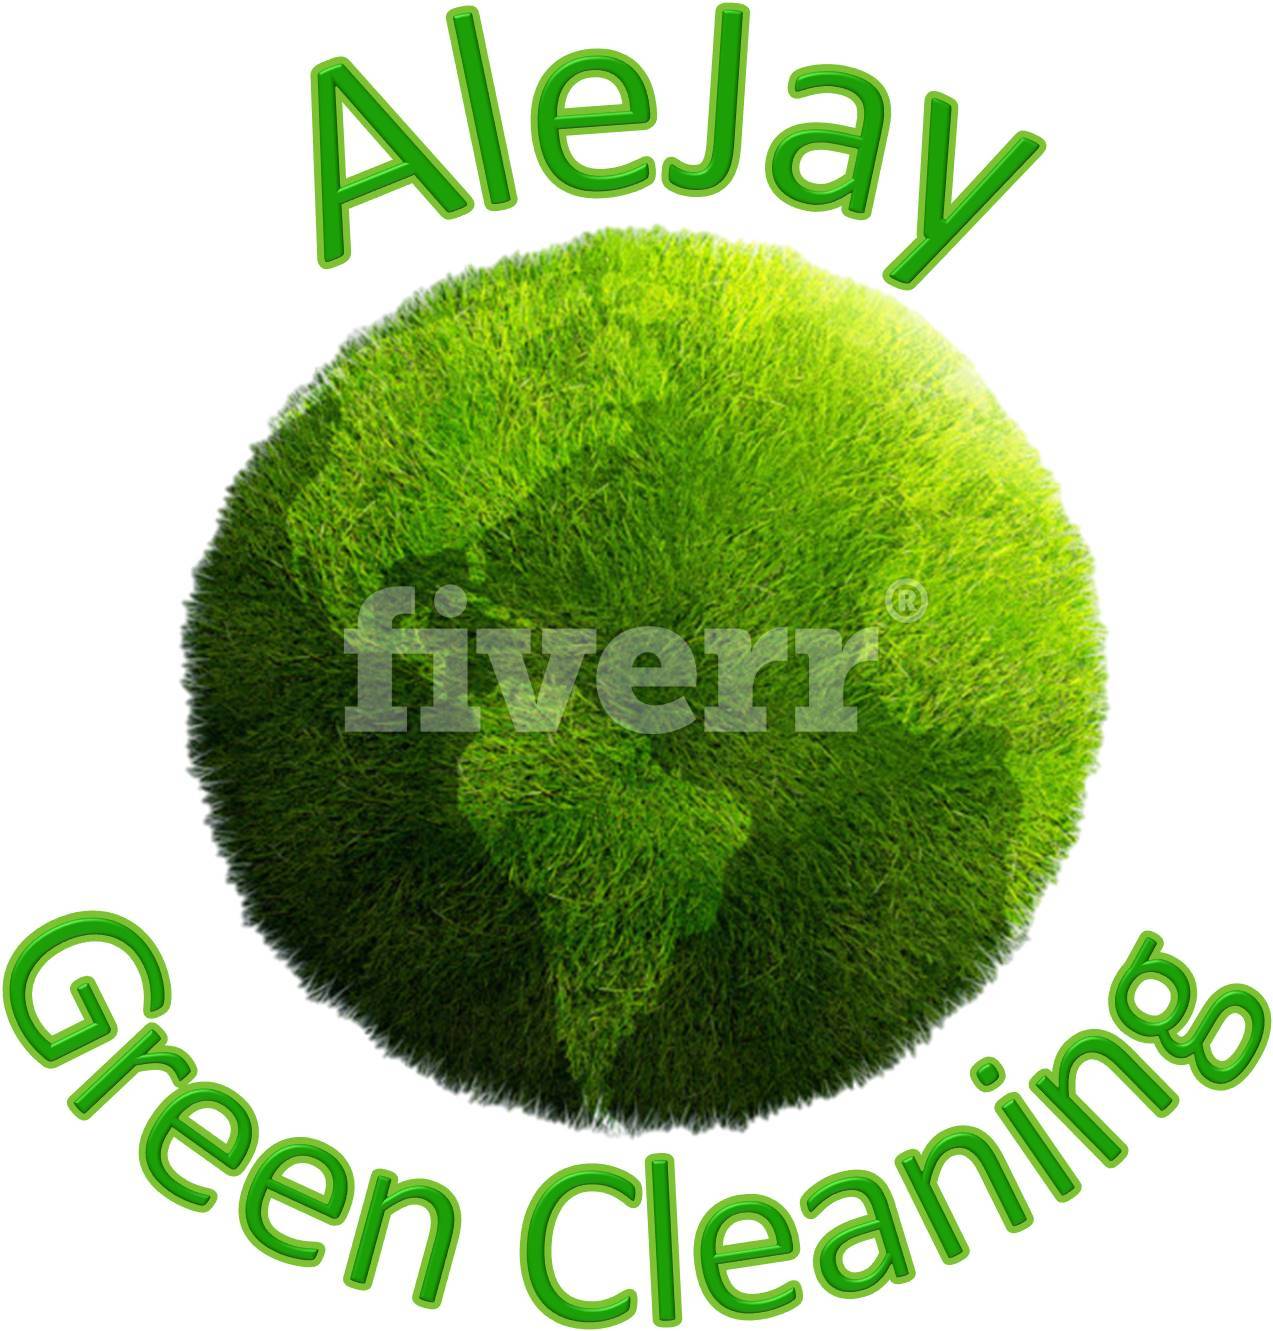 AleJay Green Cleaning